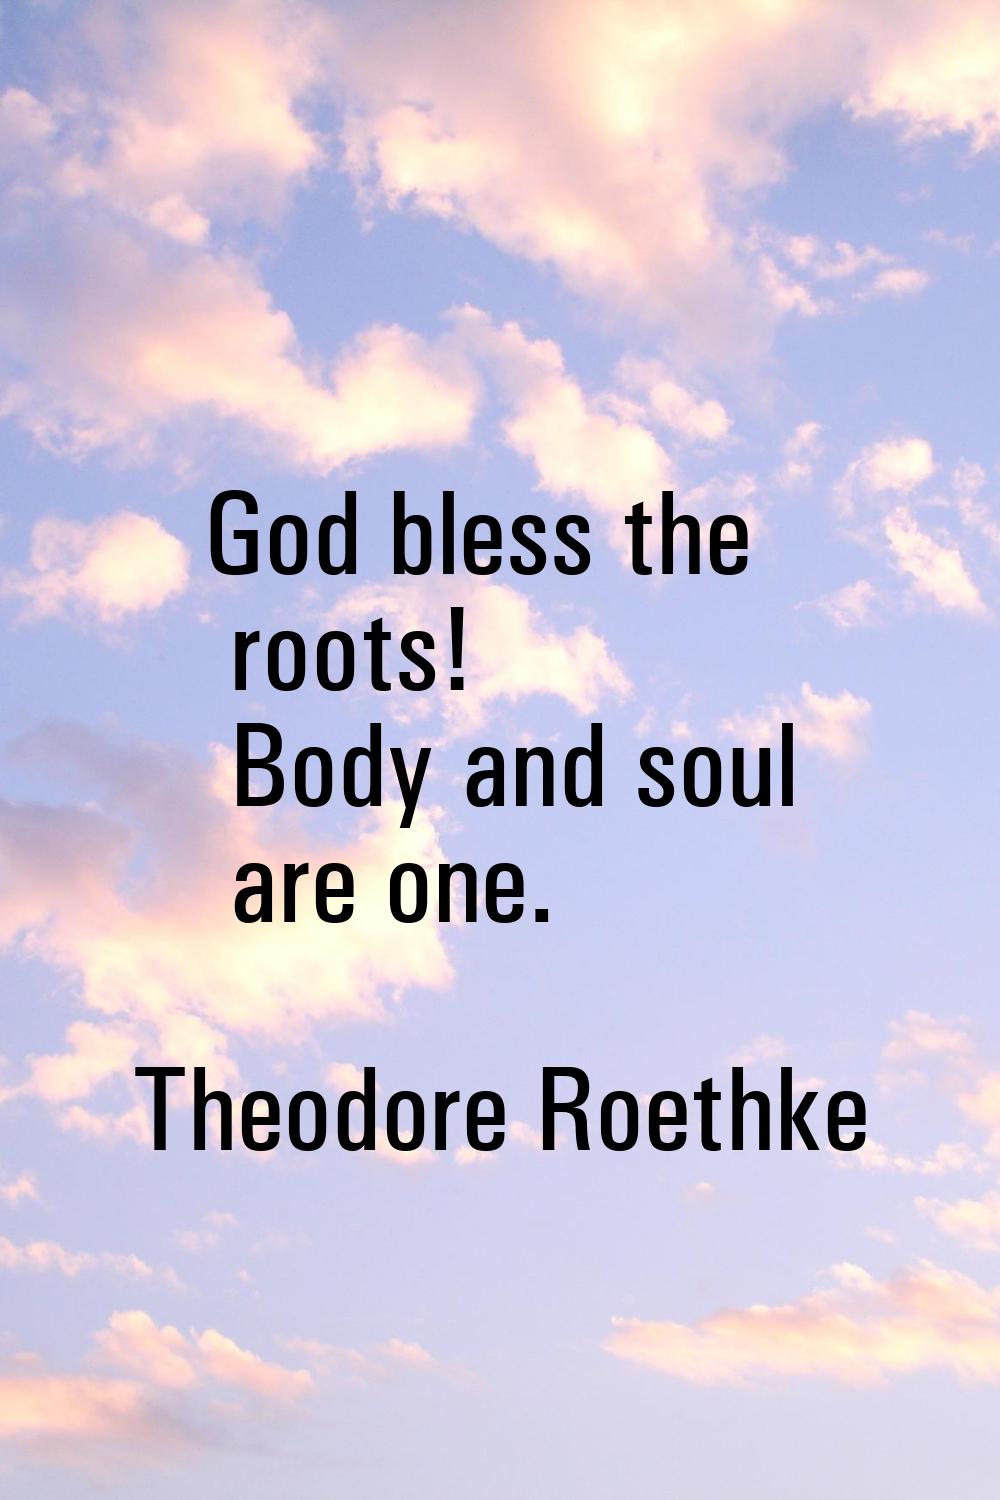 God bless the roots! Body and soul are one.